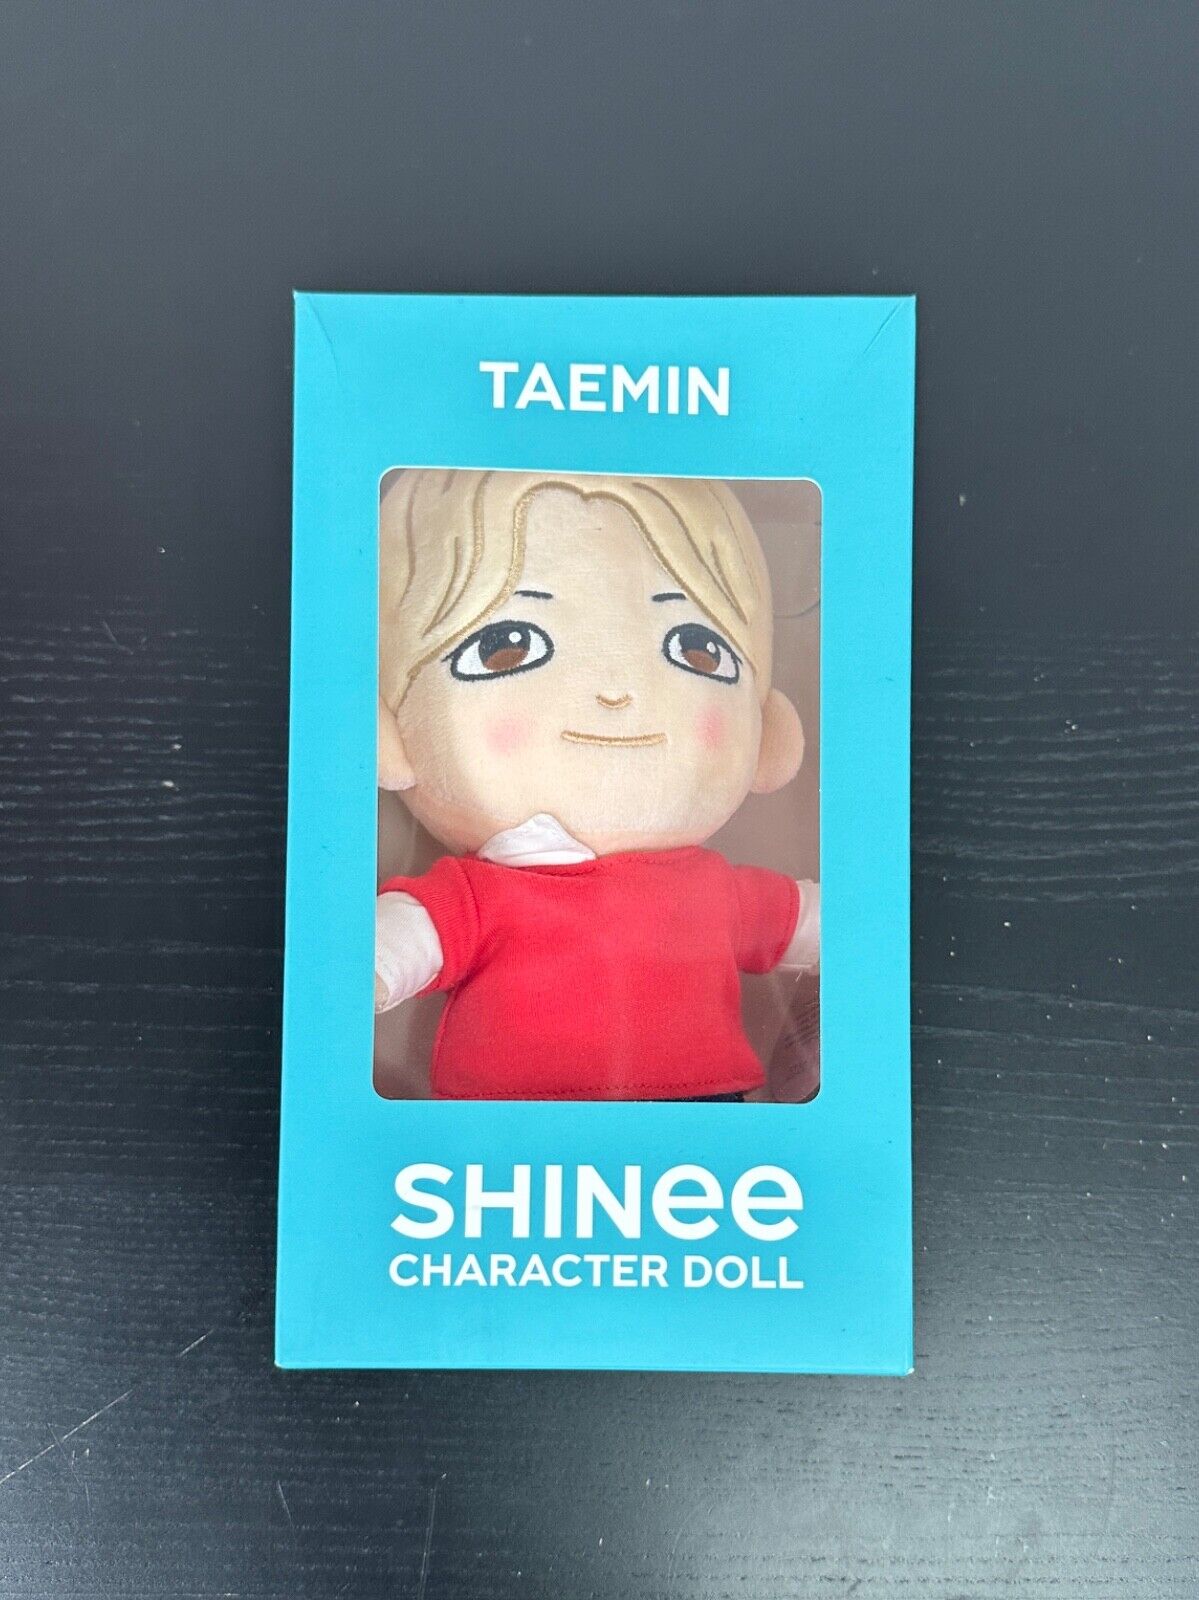 [NEW] SHINee Official Goods - Character Doll (Taemin)